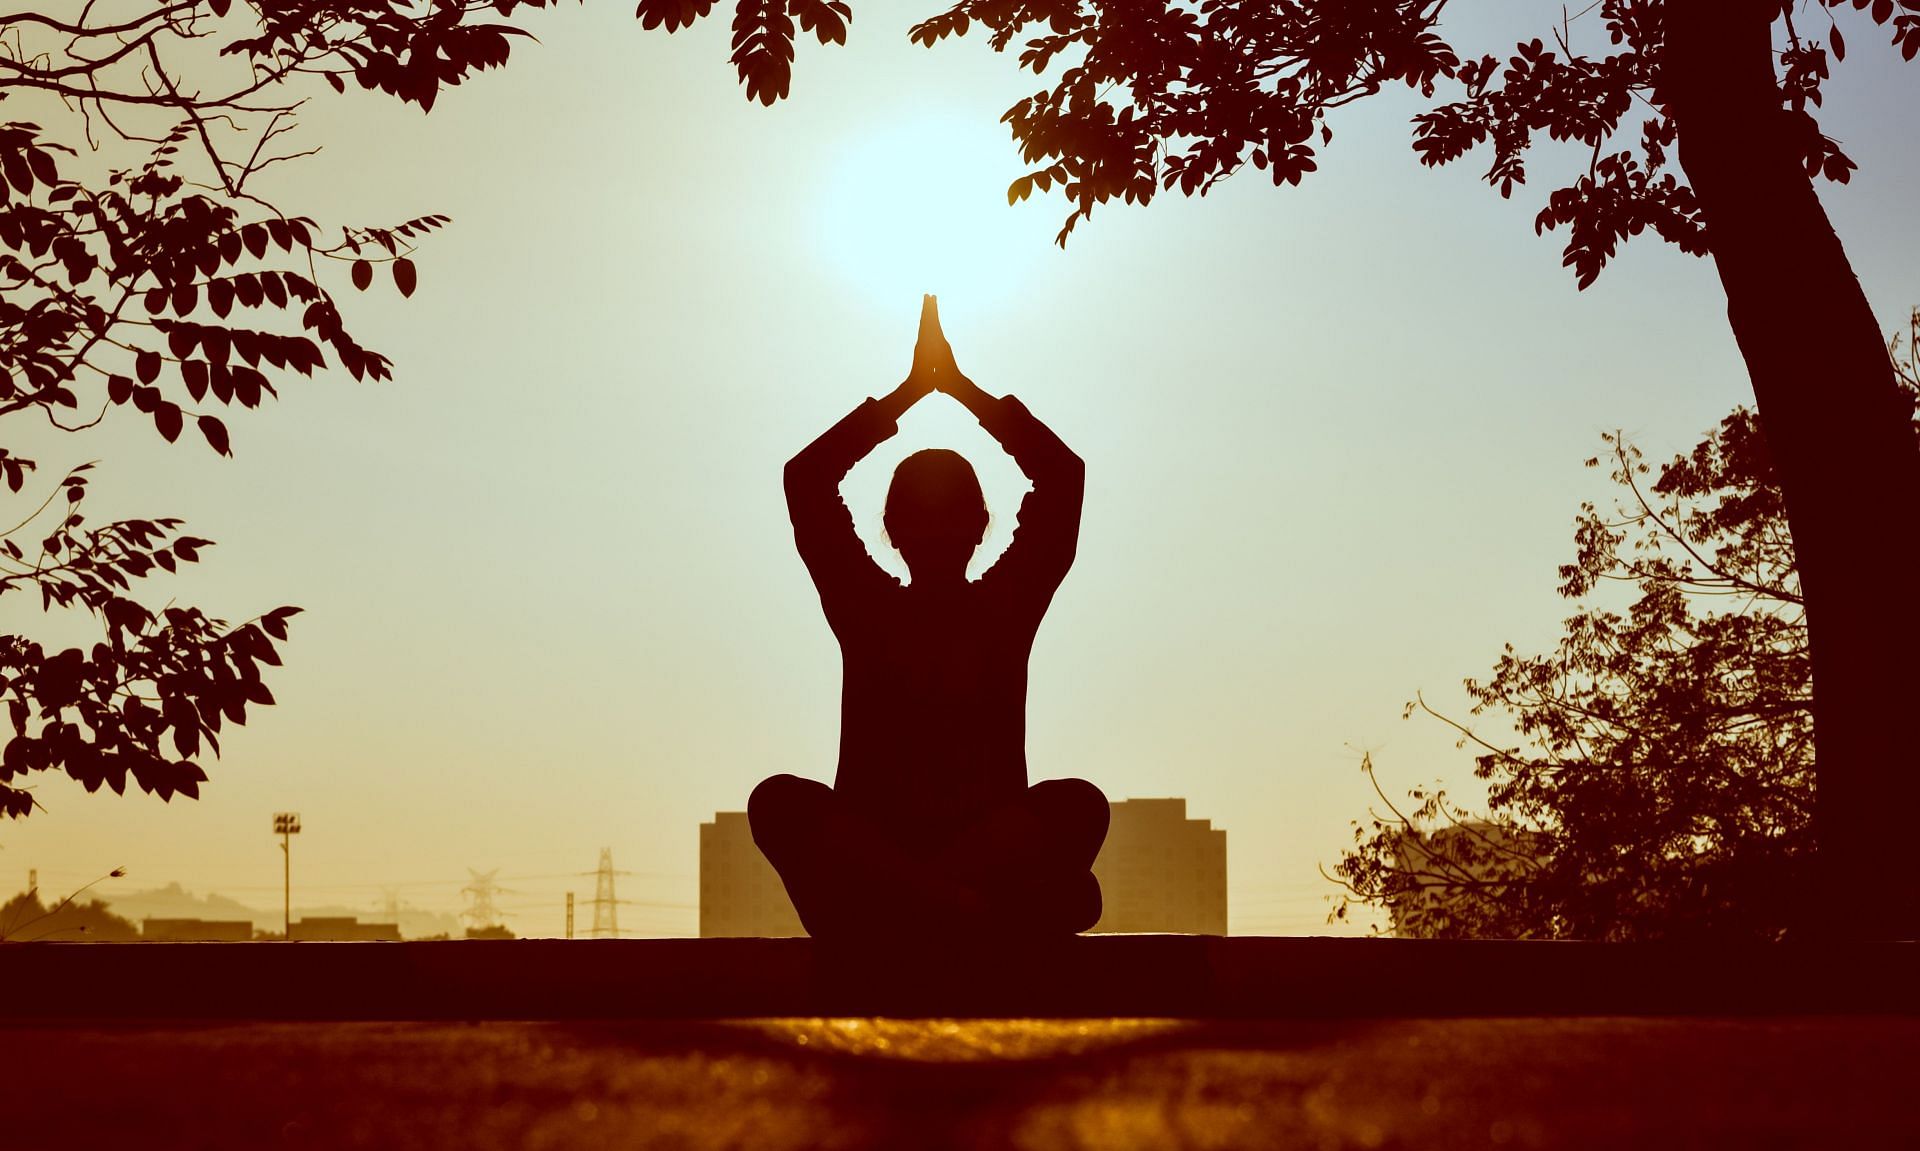 If you want to get better at yoga, these 5 tips are a must! (Image via pexels/Prasanth Inturi)